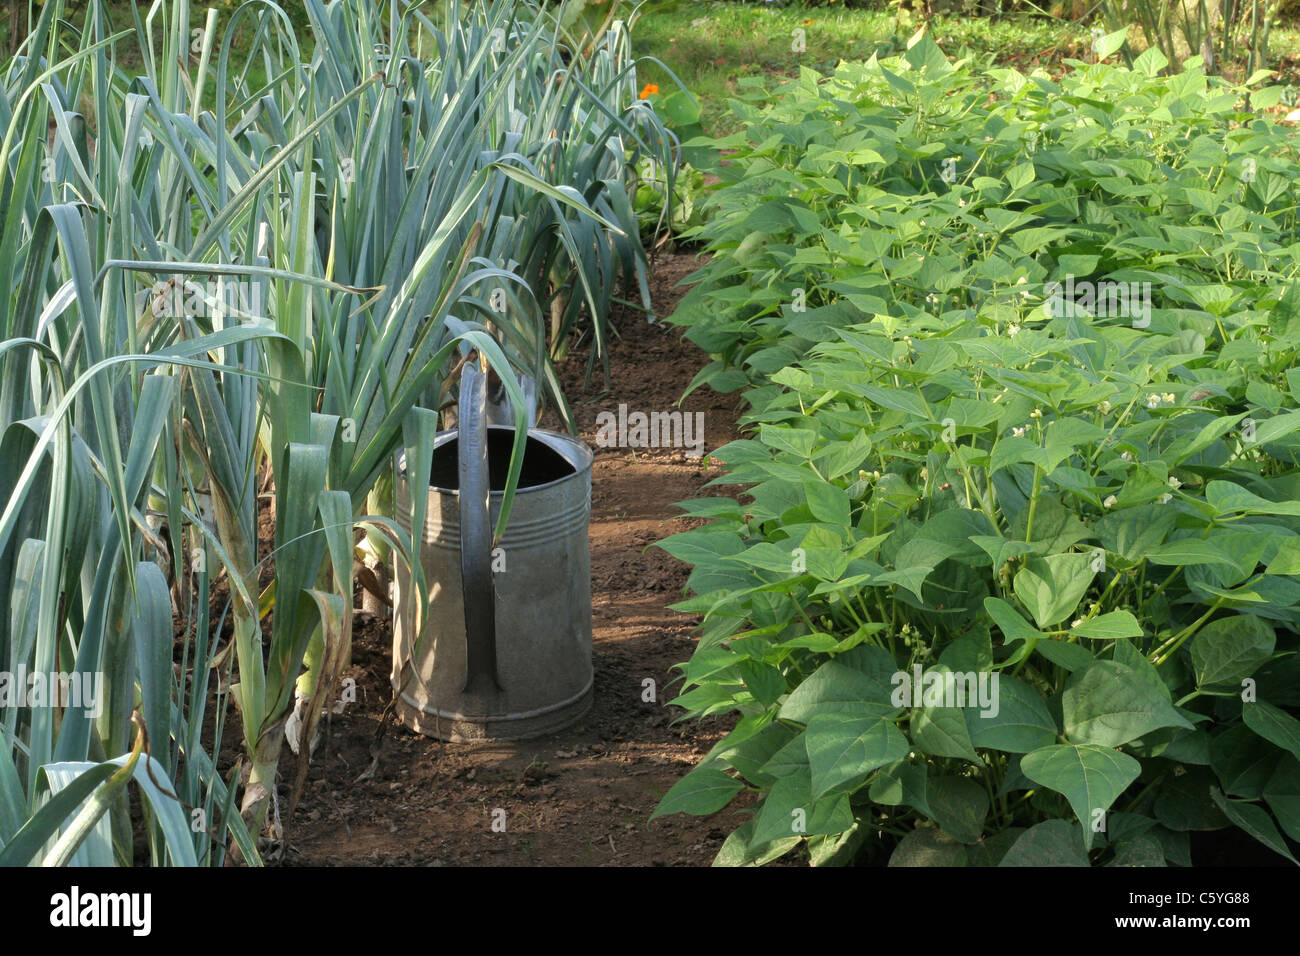 Mixed beds of leeks, variety : Blue of Solaise (Allium porrum) and green beans (phaseolus vulgaris), a zinc watering can. Stock Photo